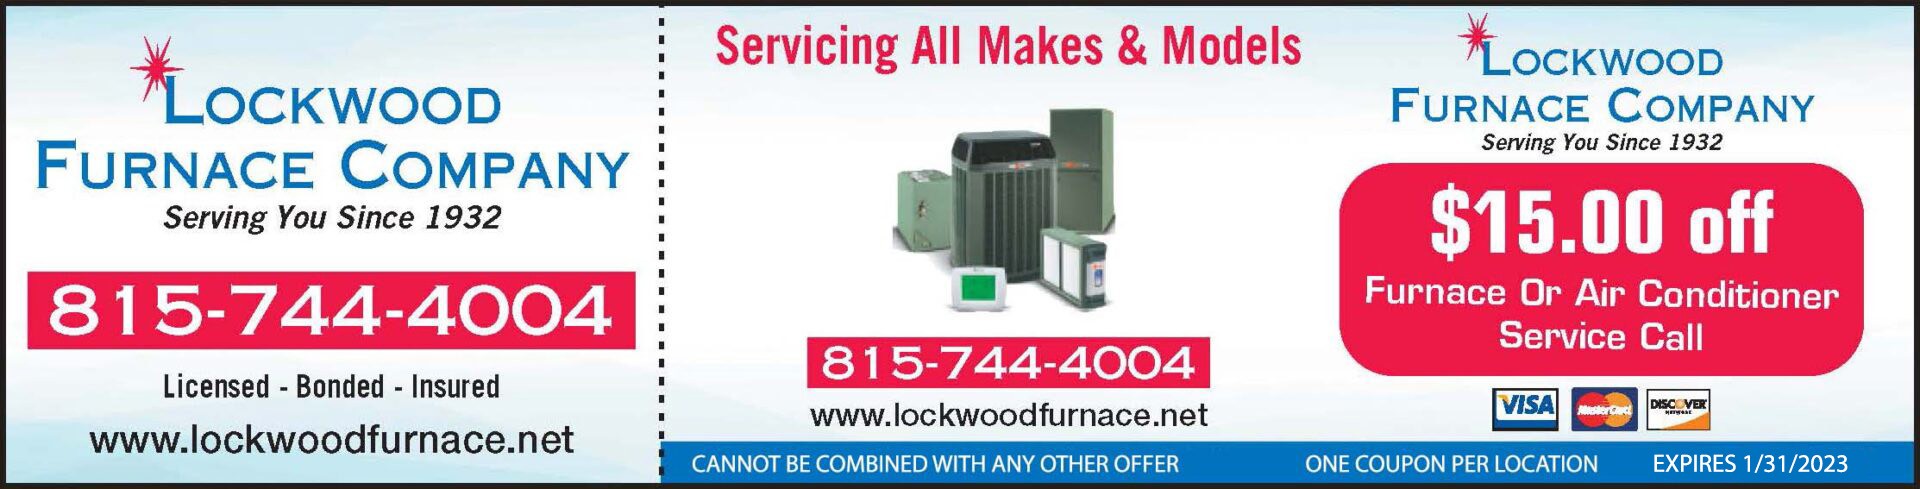 Furnace or Air Conditioner Service Coupon - $15 Off - Lockwood Furnace Company